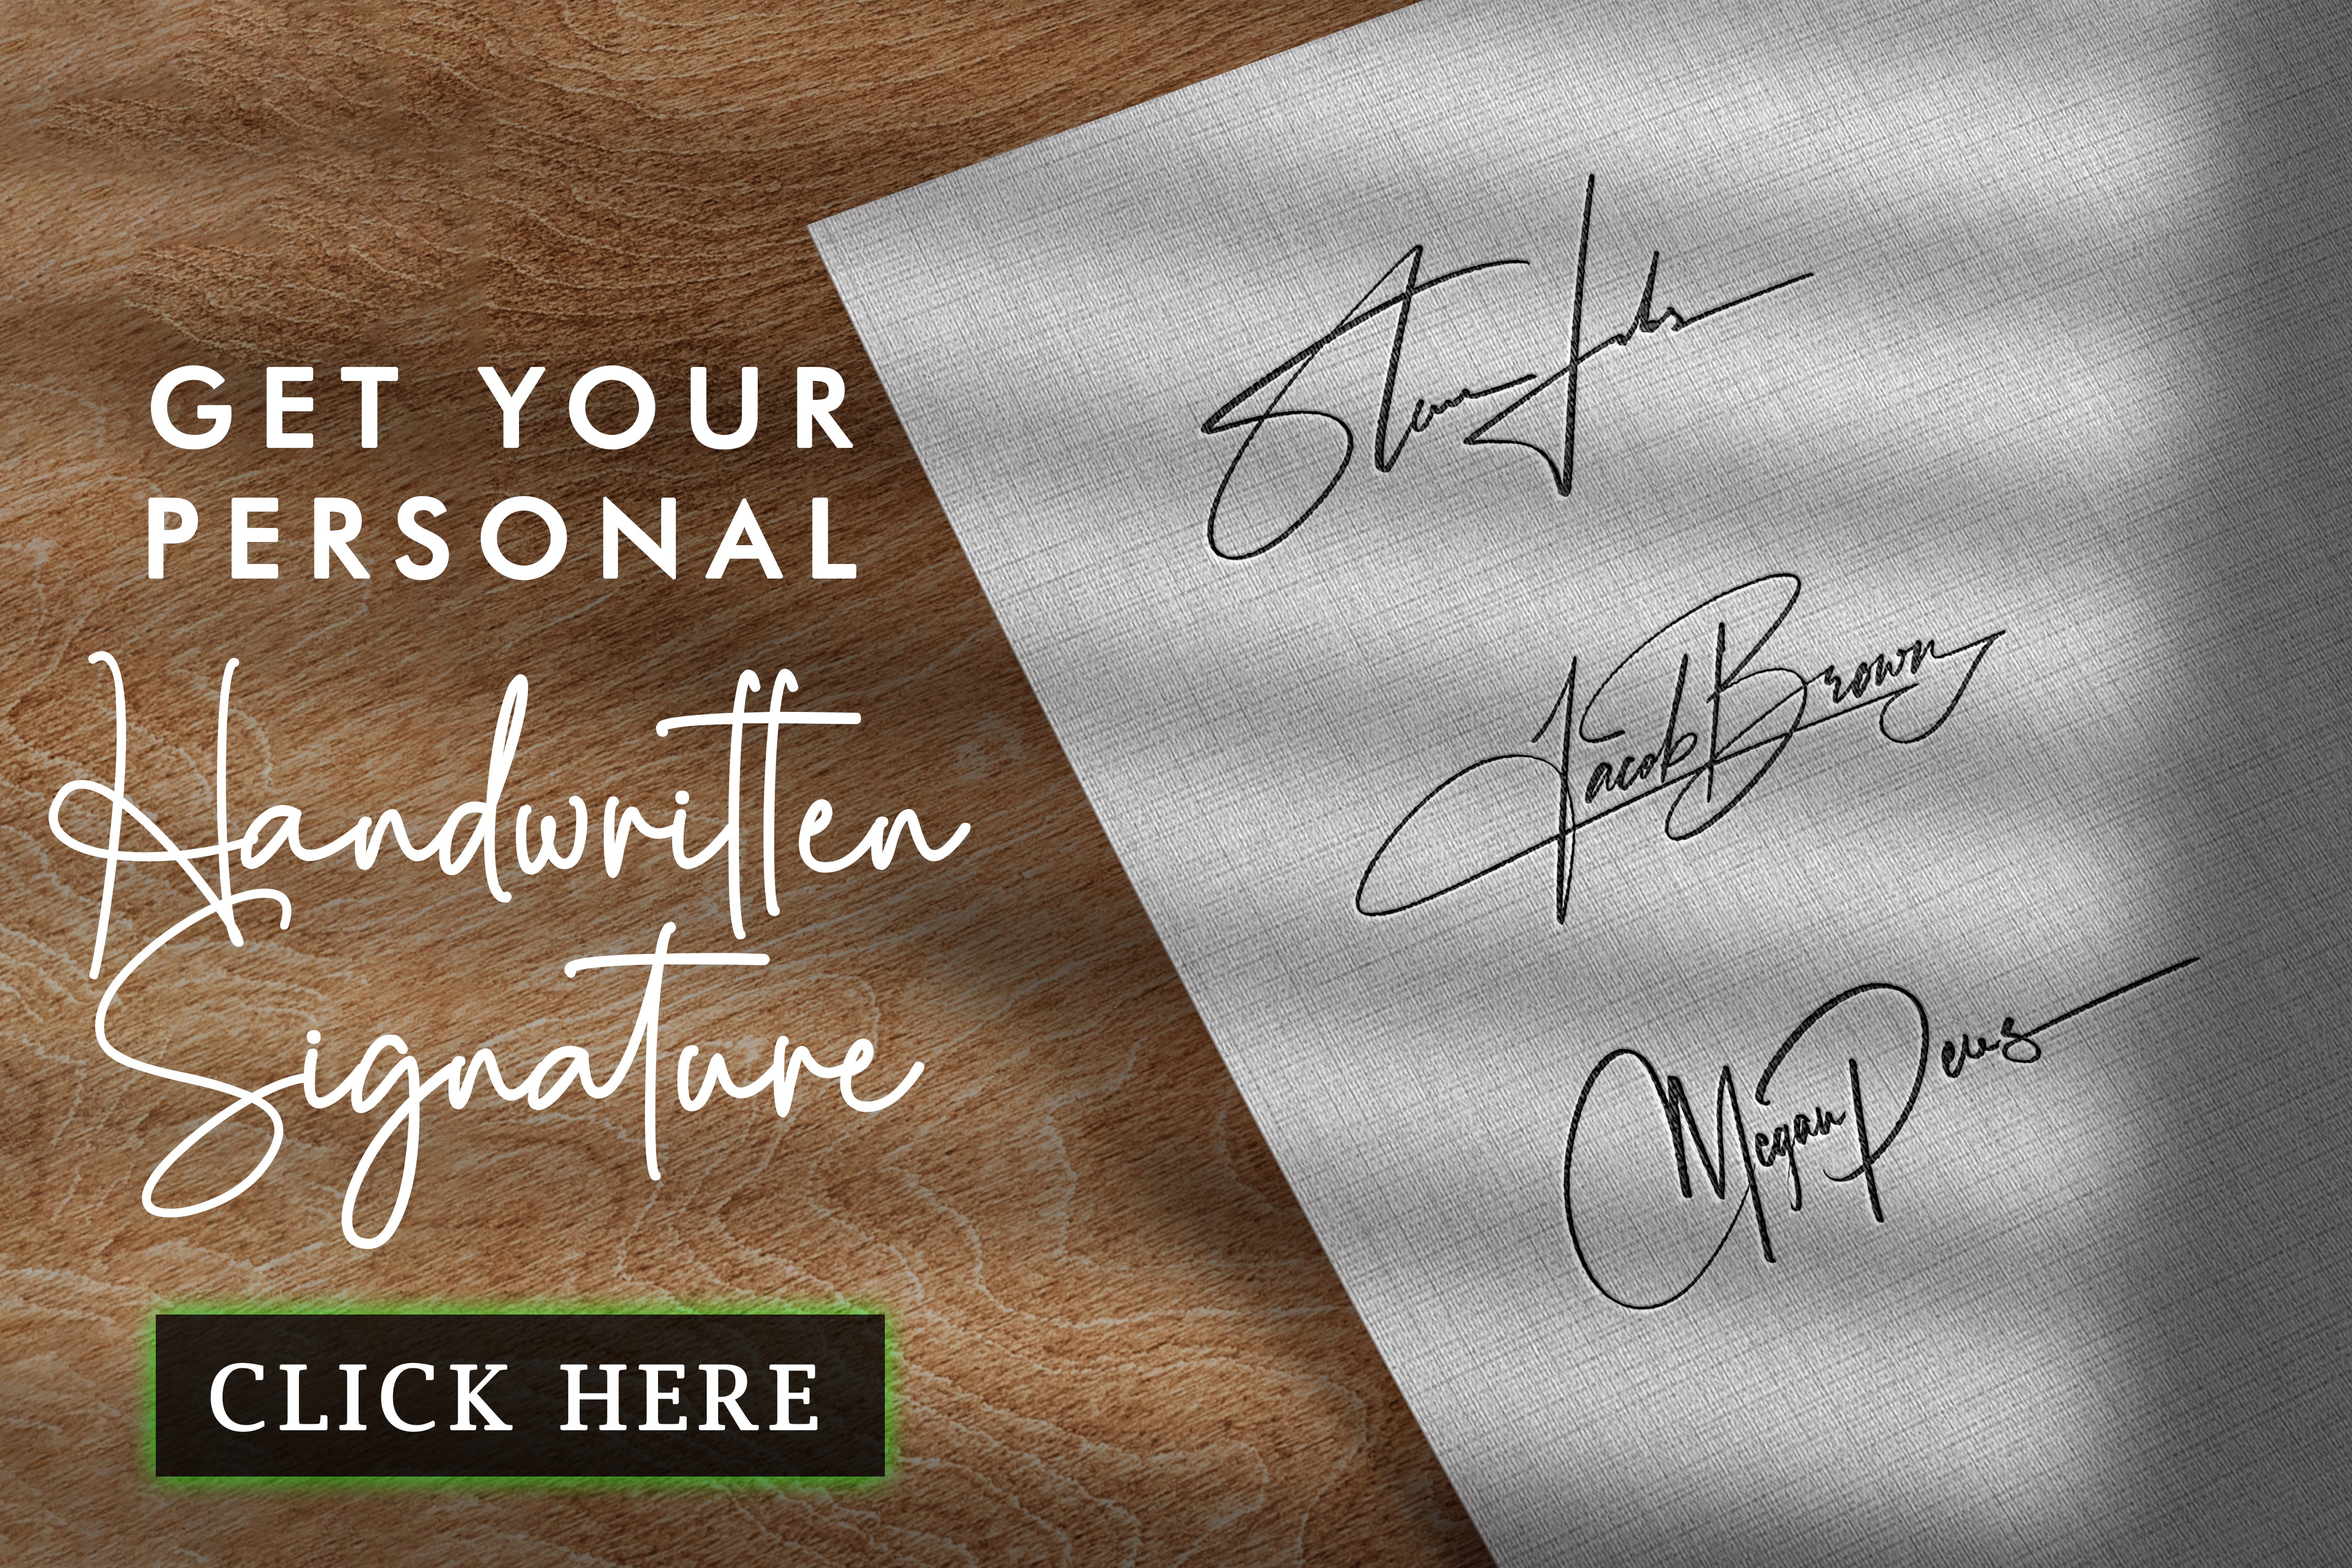 Discover the value of Steve Jobs signature. Explore the worth of this iconic symbol cherished by fans of the visionary tech pioneer.